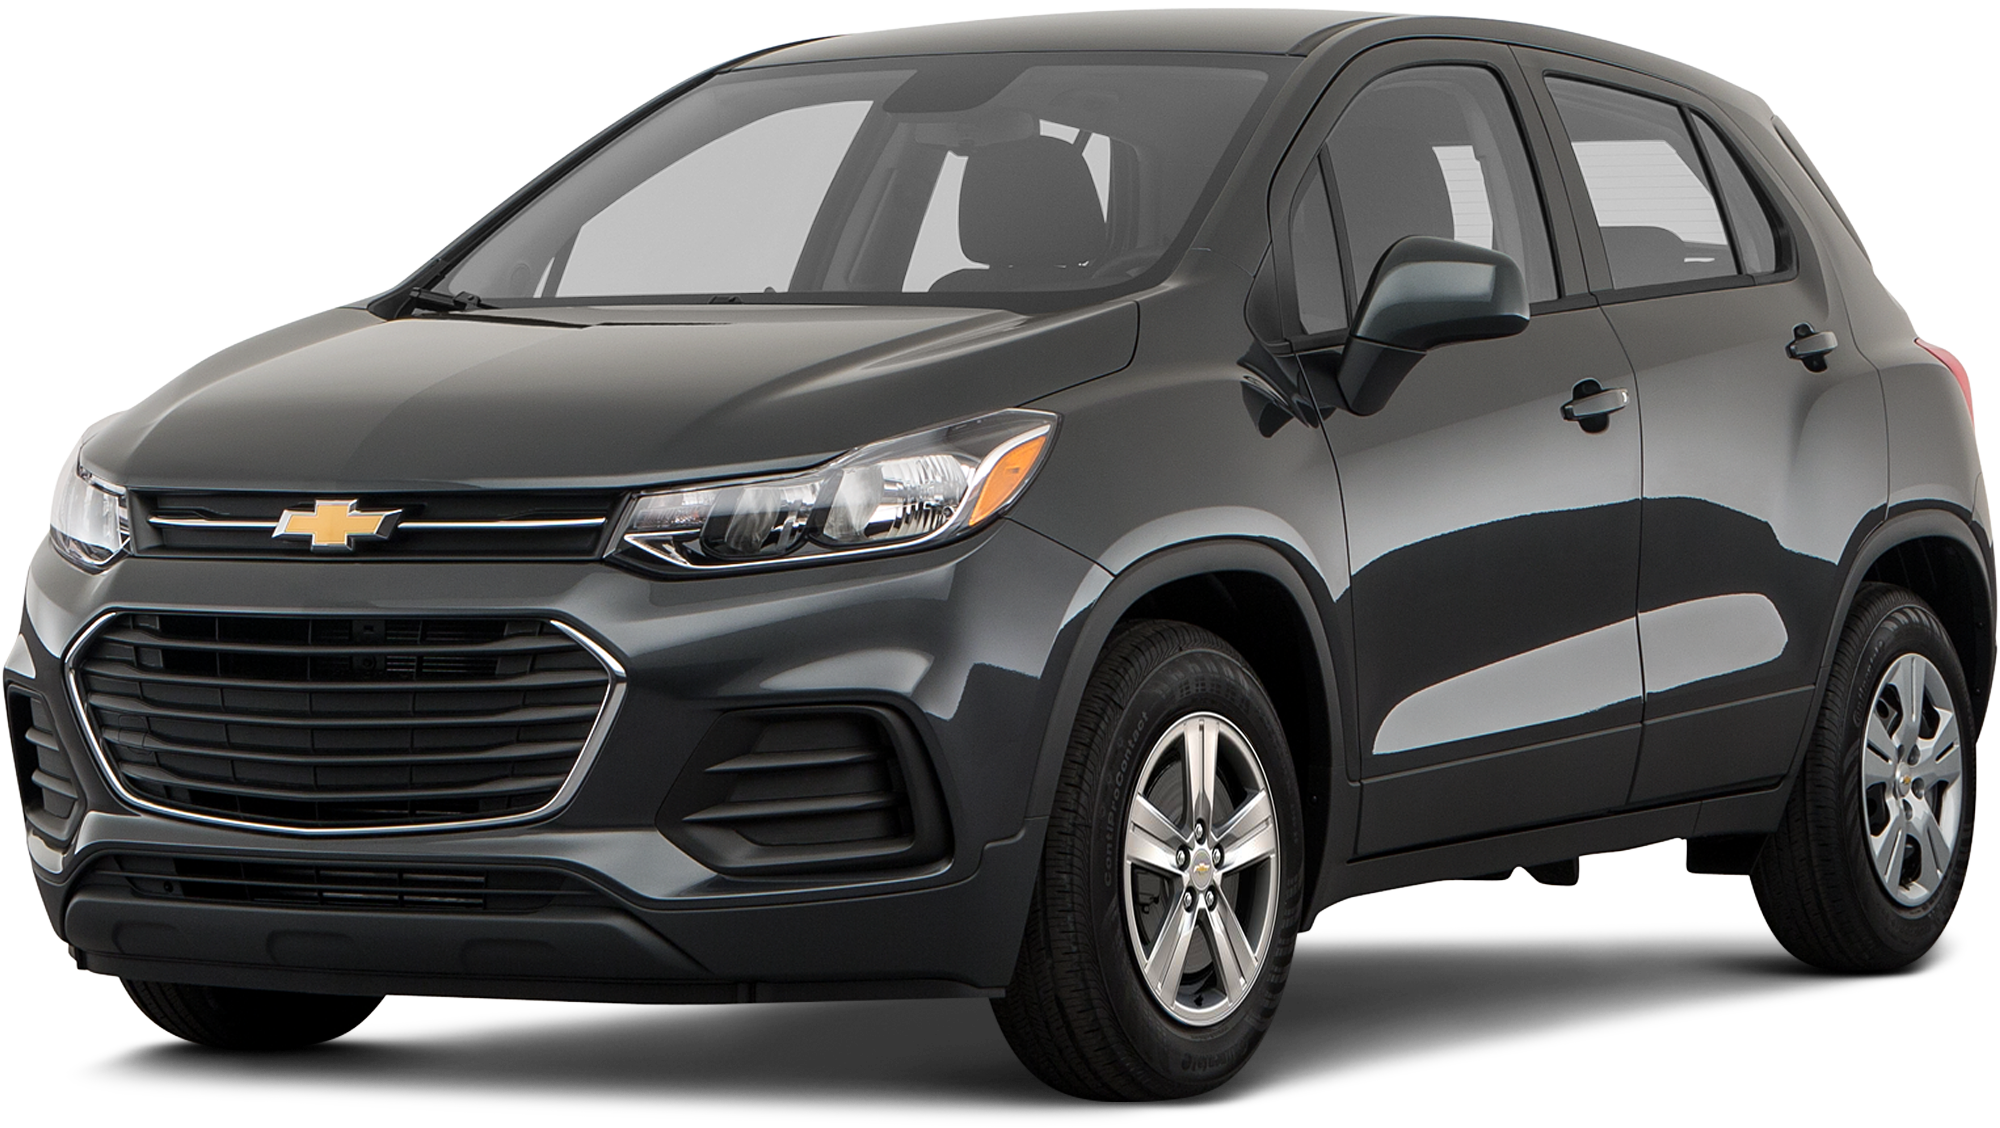 2022 Chevrolet Trax Incentives, Specials & Offers in Blairsville PA